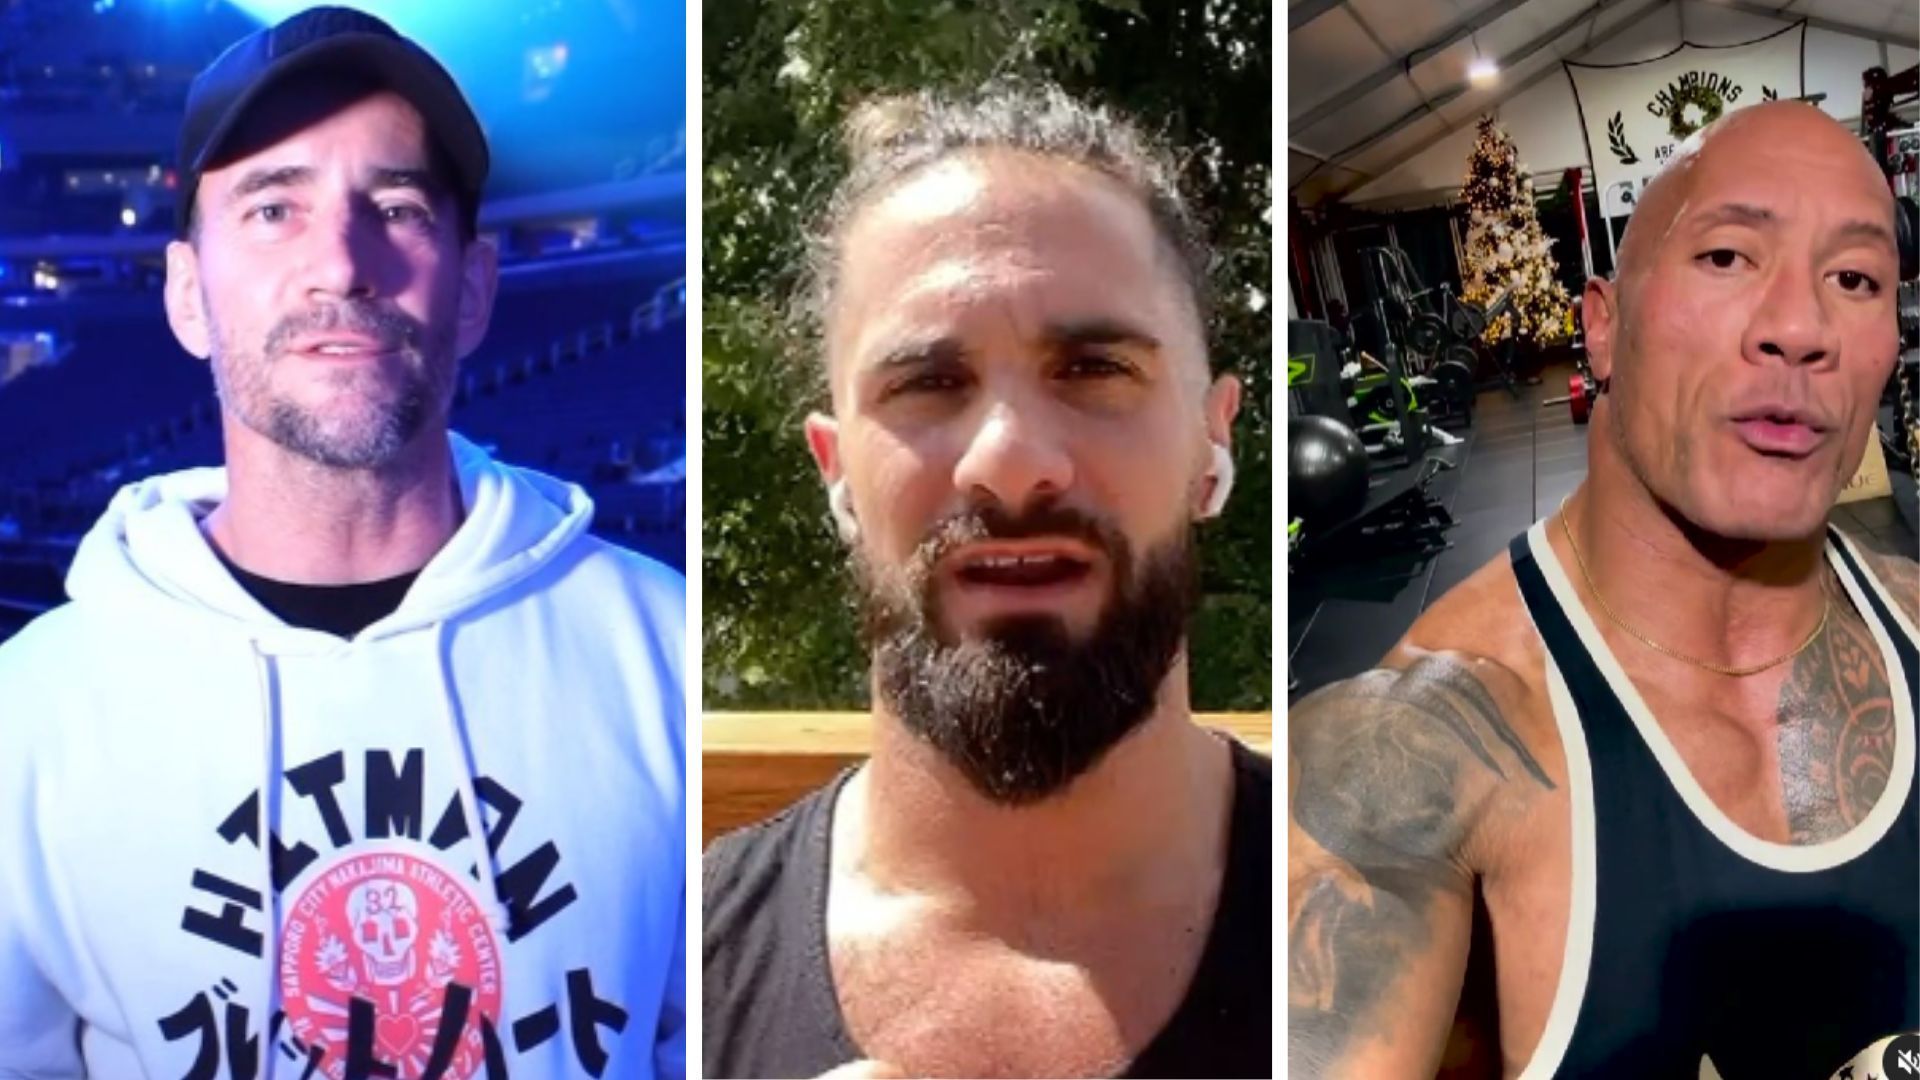 CM Punk on the left, Seth Rollins in the middle, The Rock on the right